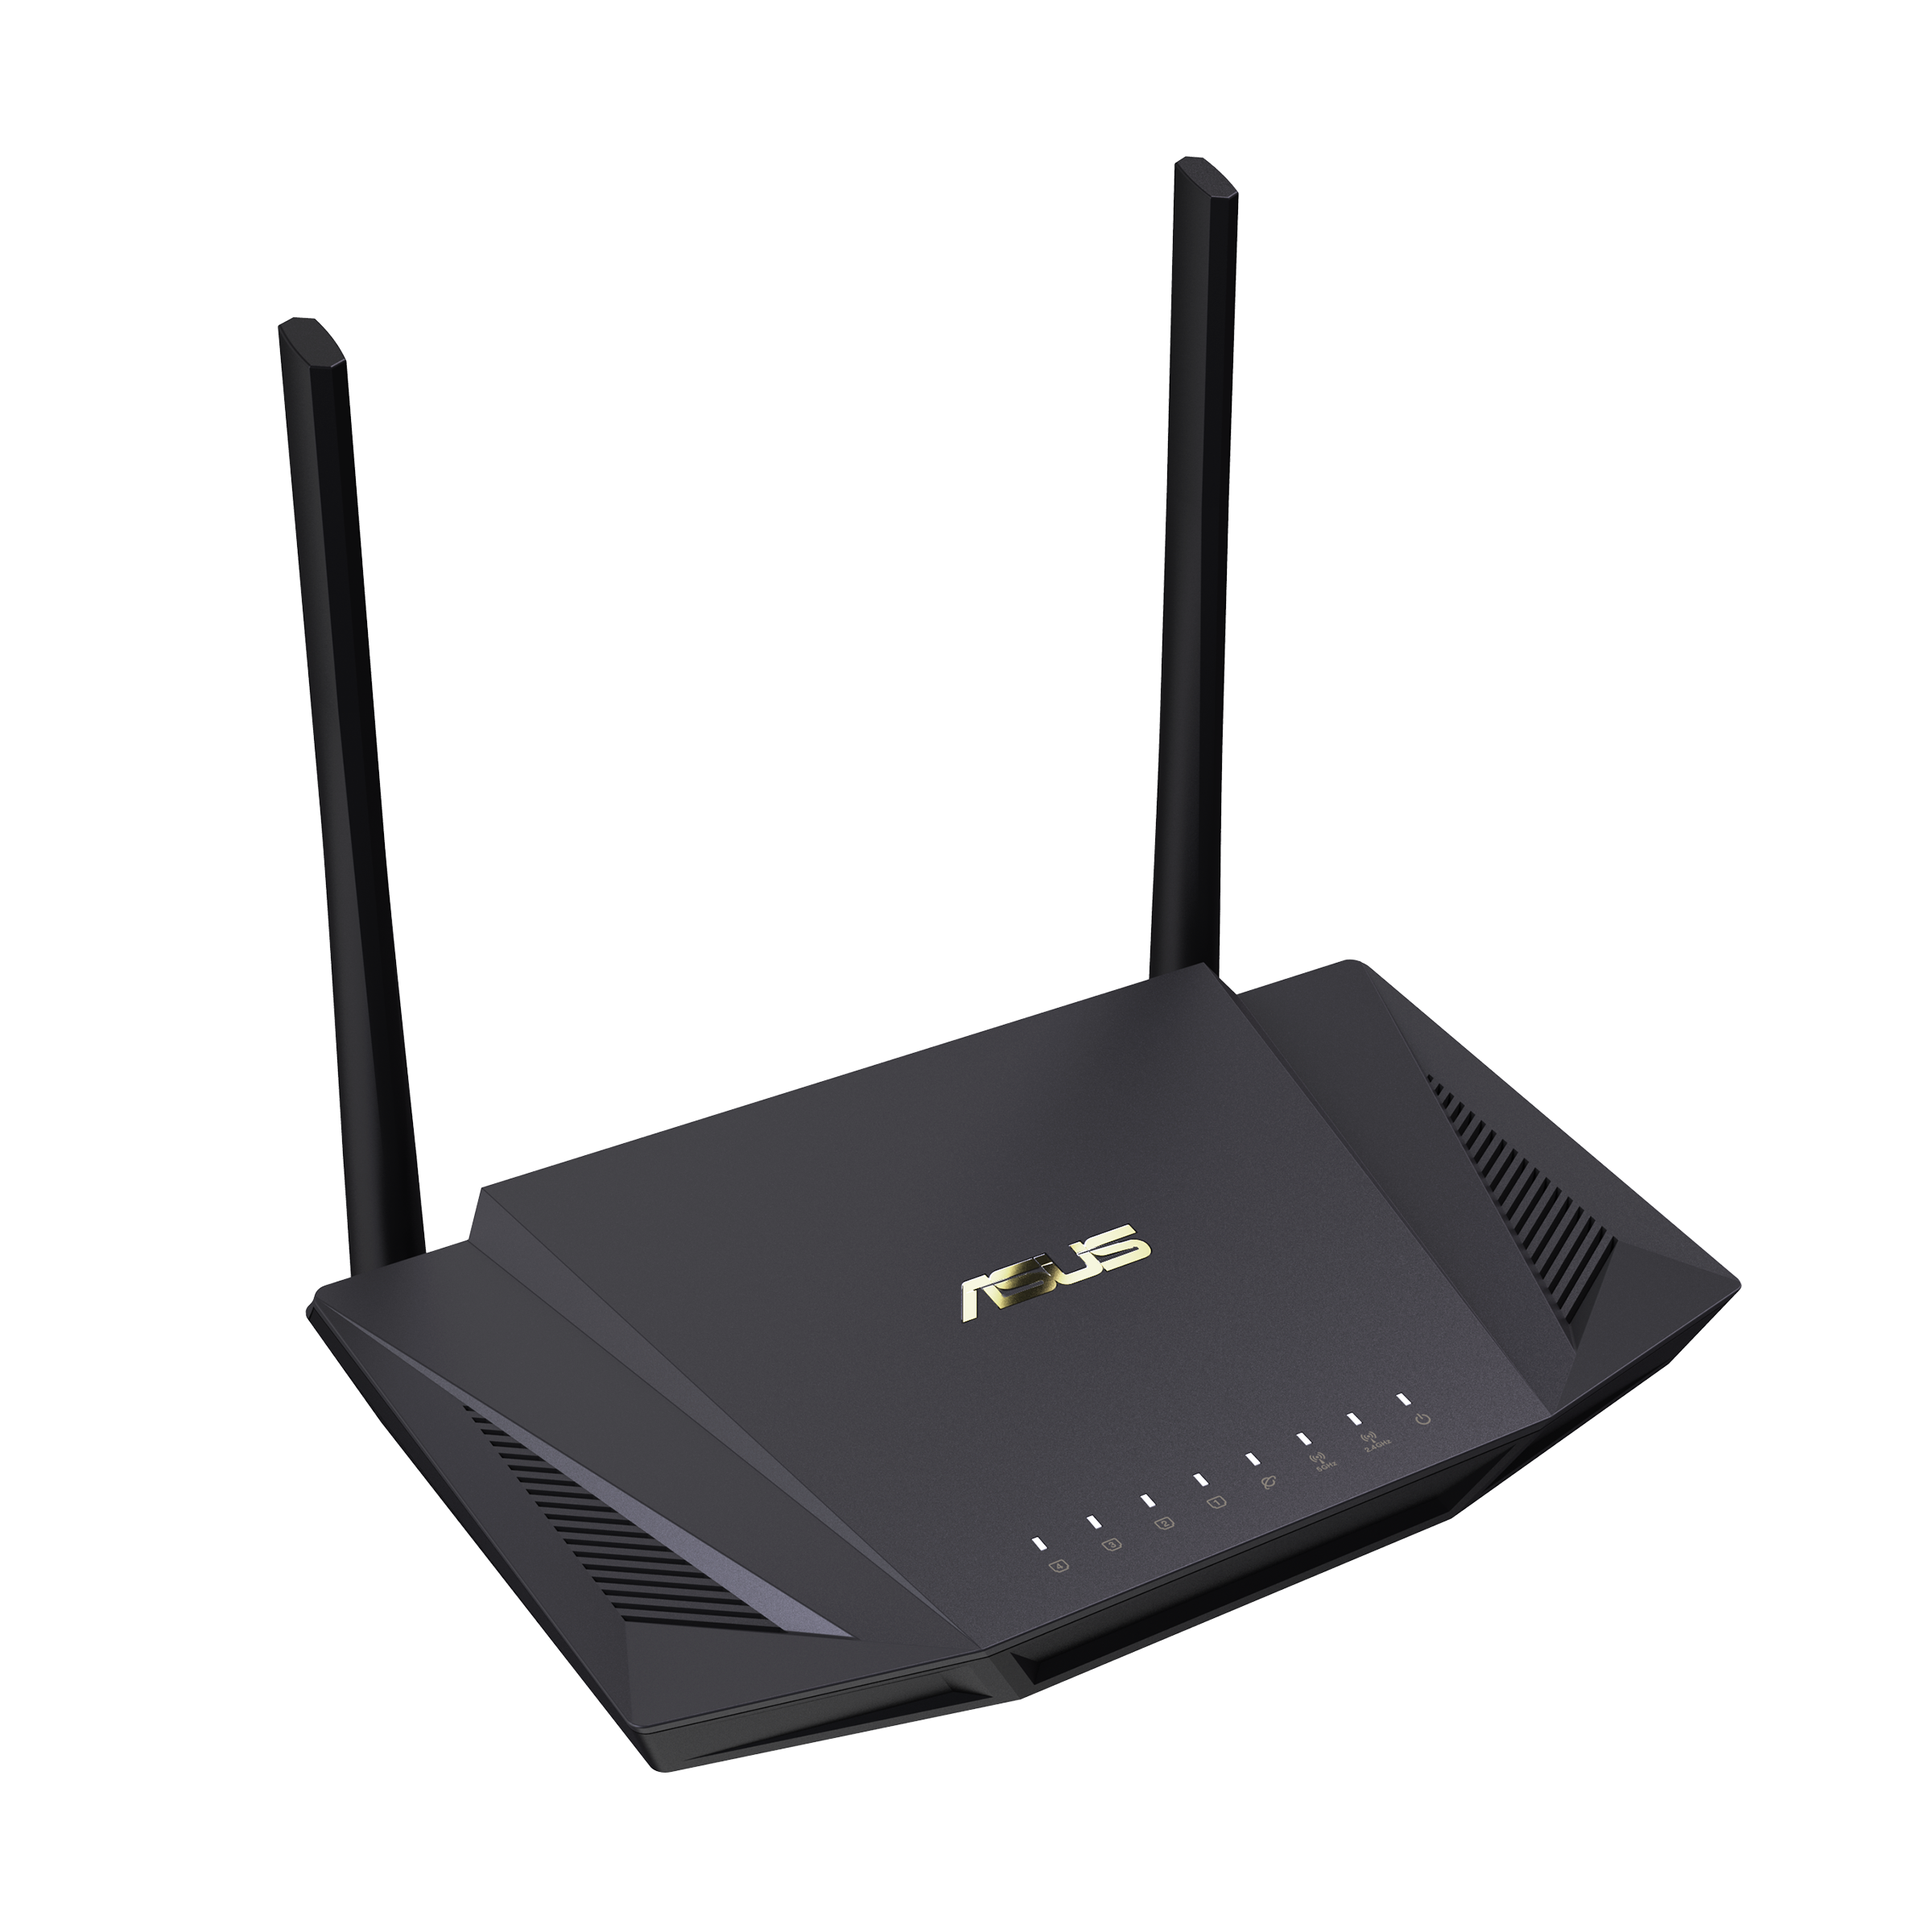 Asus RT-AX56U AX1800 Dual Band WiFi 6 (802.11ax) Router supporting MU-MIMO and OFDMA technology, with AiProtection Pro network security powered by Trend Microâ„¢, compatible with ASUS AiMesh WiFi system, Unifi Compatible, rt ax56u